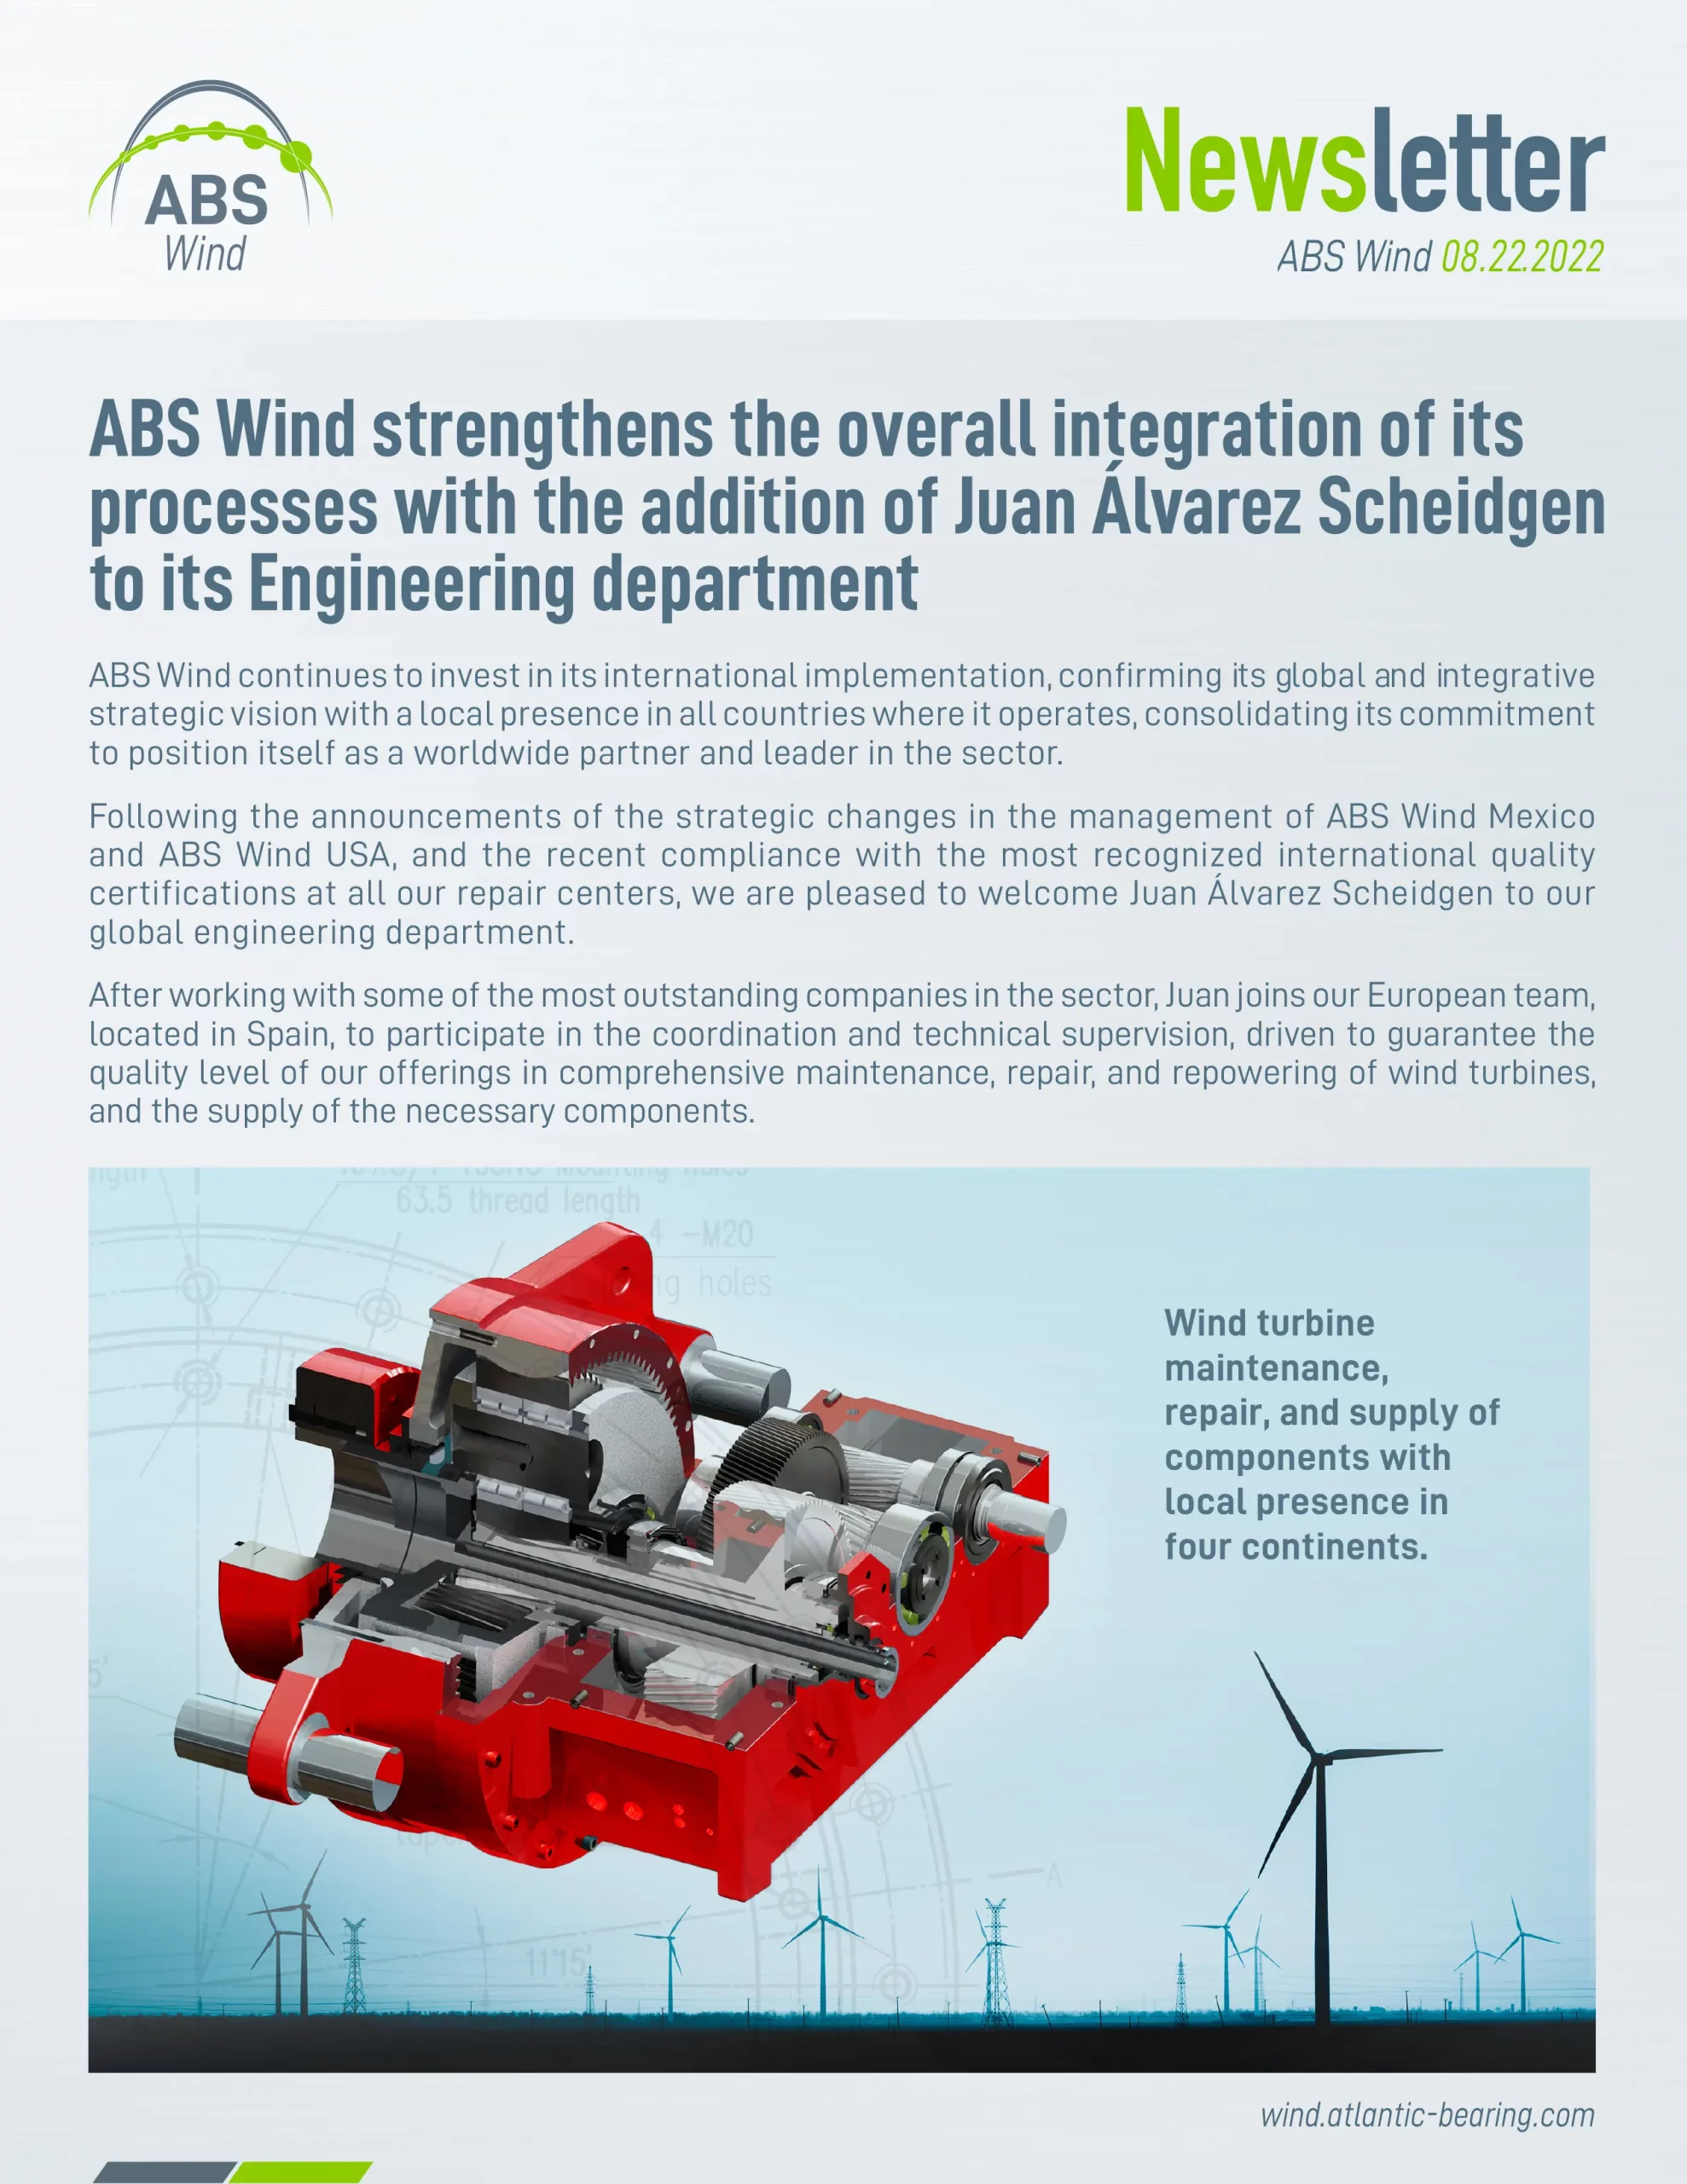 ABS WIND strengthens the overall integration of its processes with the addition of Juan Álvarez Scheidgen to its Engineering department